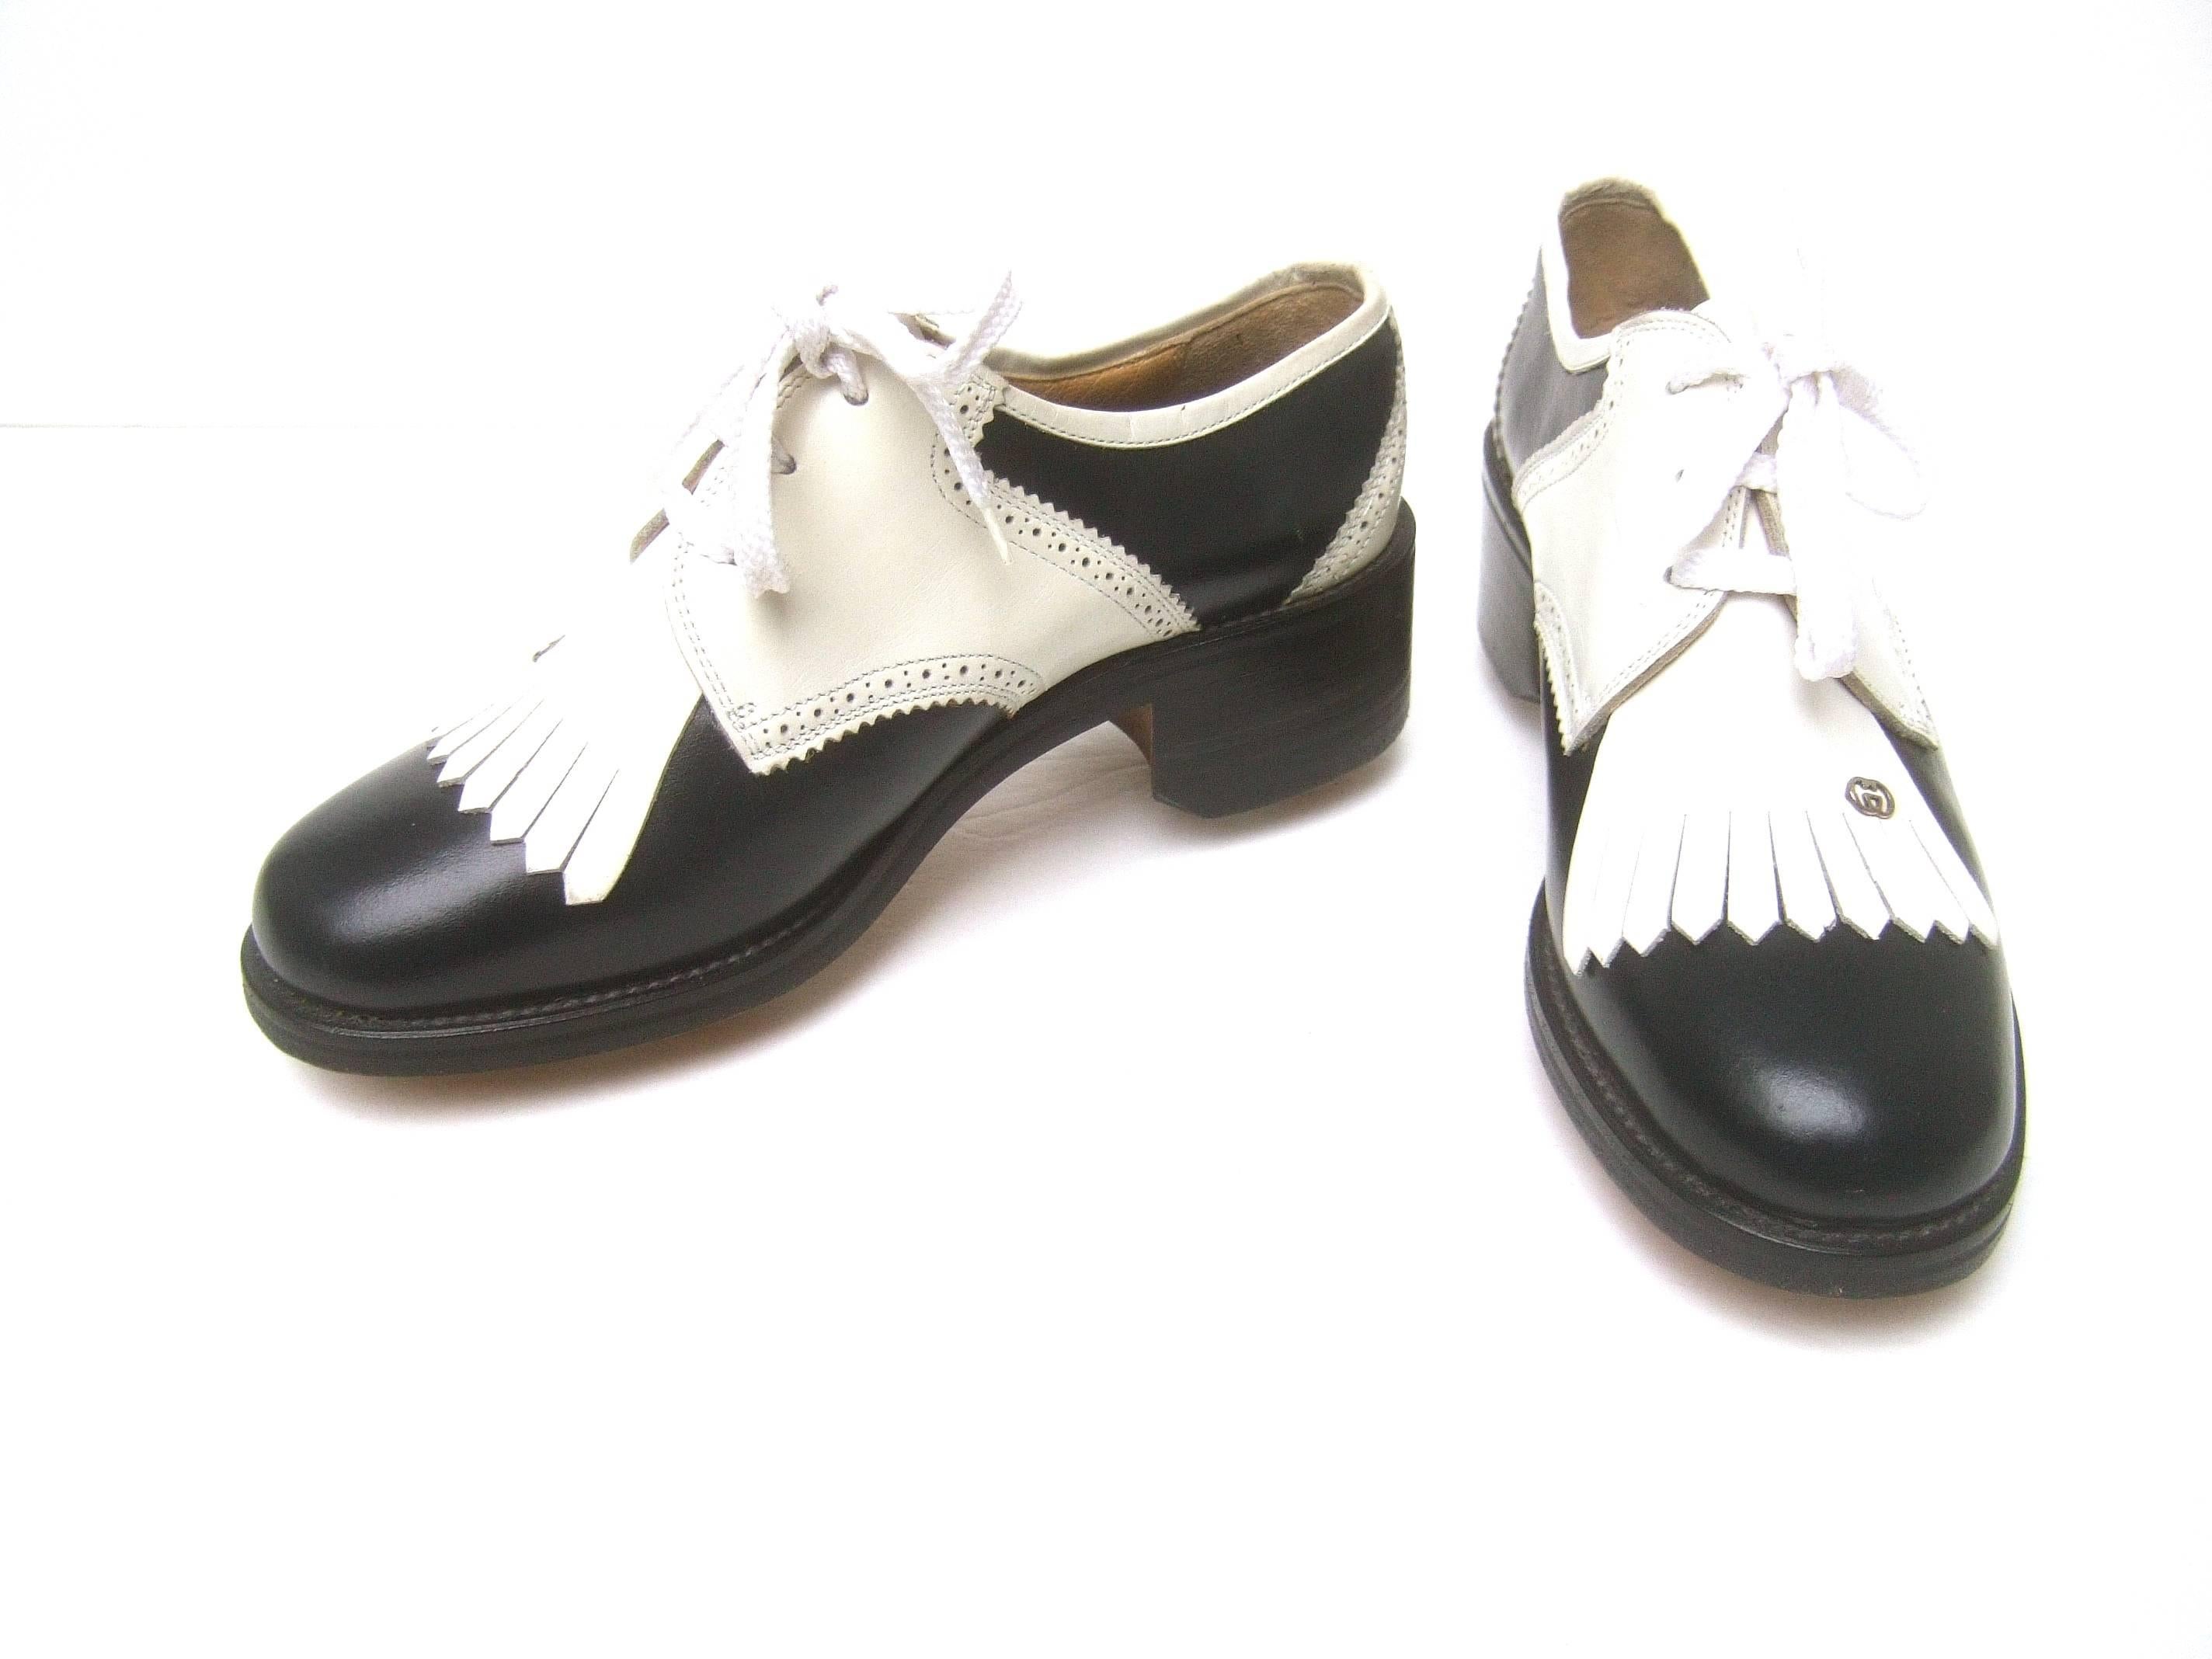 Gucci Women's leather brogue golf shoes Size 36 B
The rare stylish golf shoes are designed with 
contrasting black & white leather 

The front of each shoe is adorned with Gucci's
silver metal interlocked G.G. initials 

The classic designer